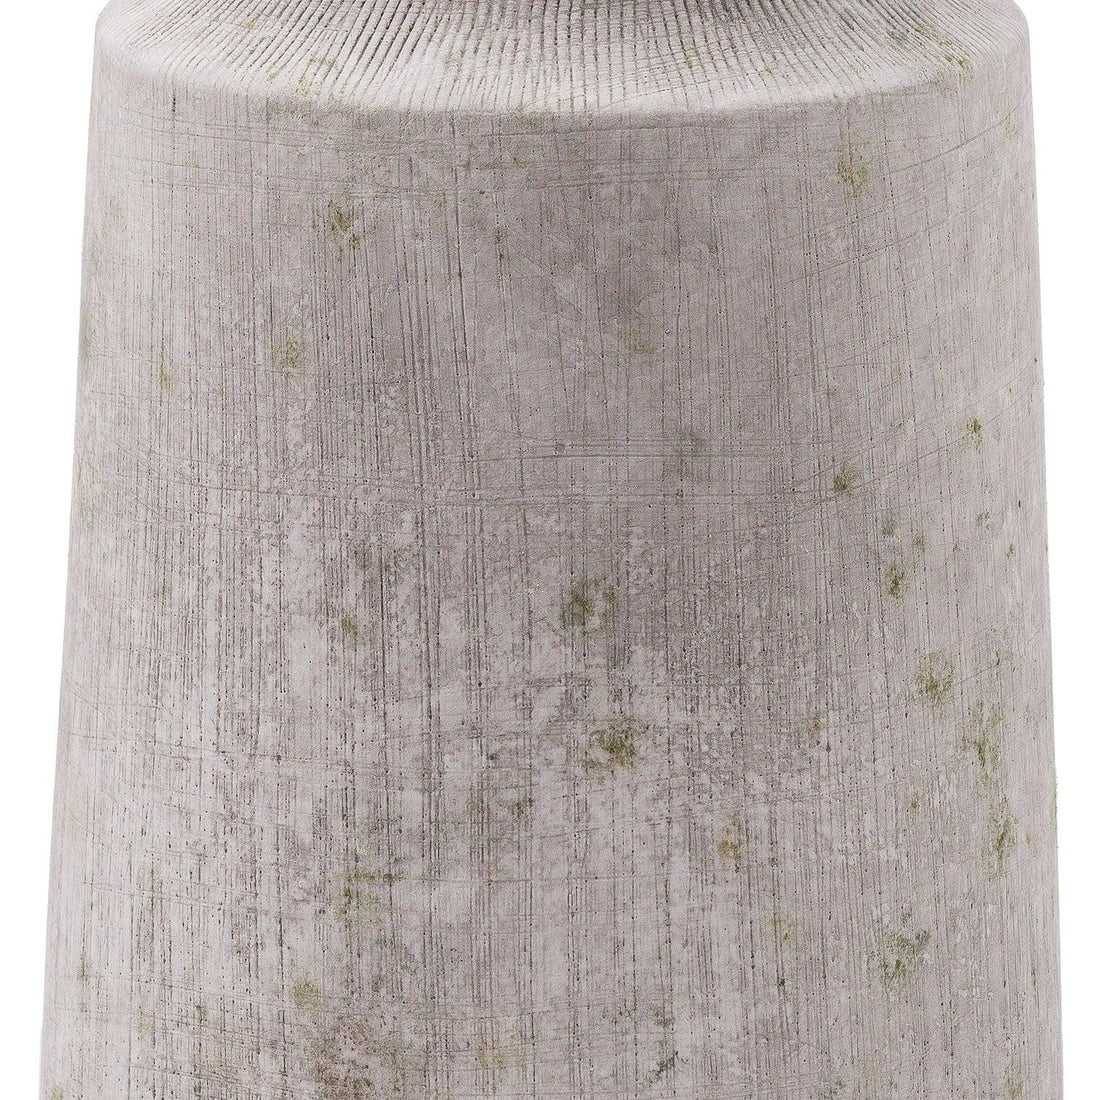 Bloomville Urn Stone Vase - £69.95 - Gifts & Accessories > Vases > Christmas Room Decorations 